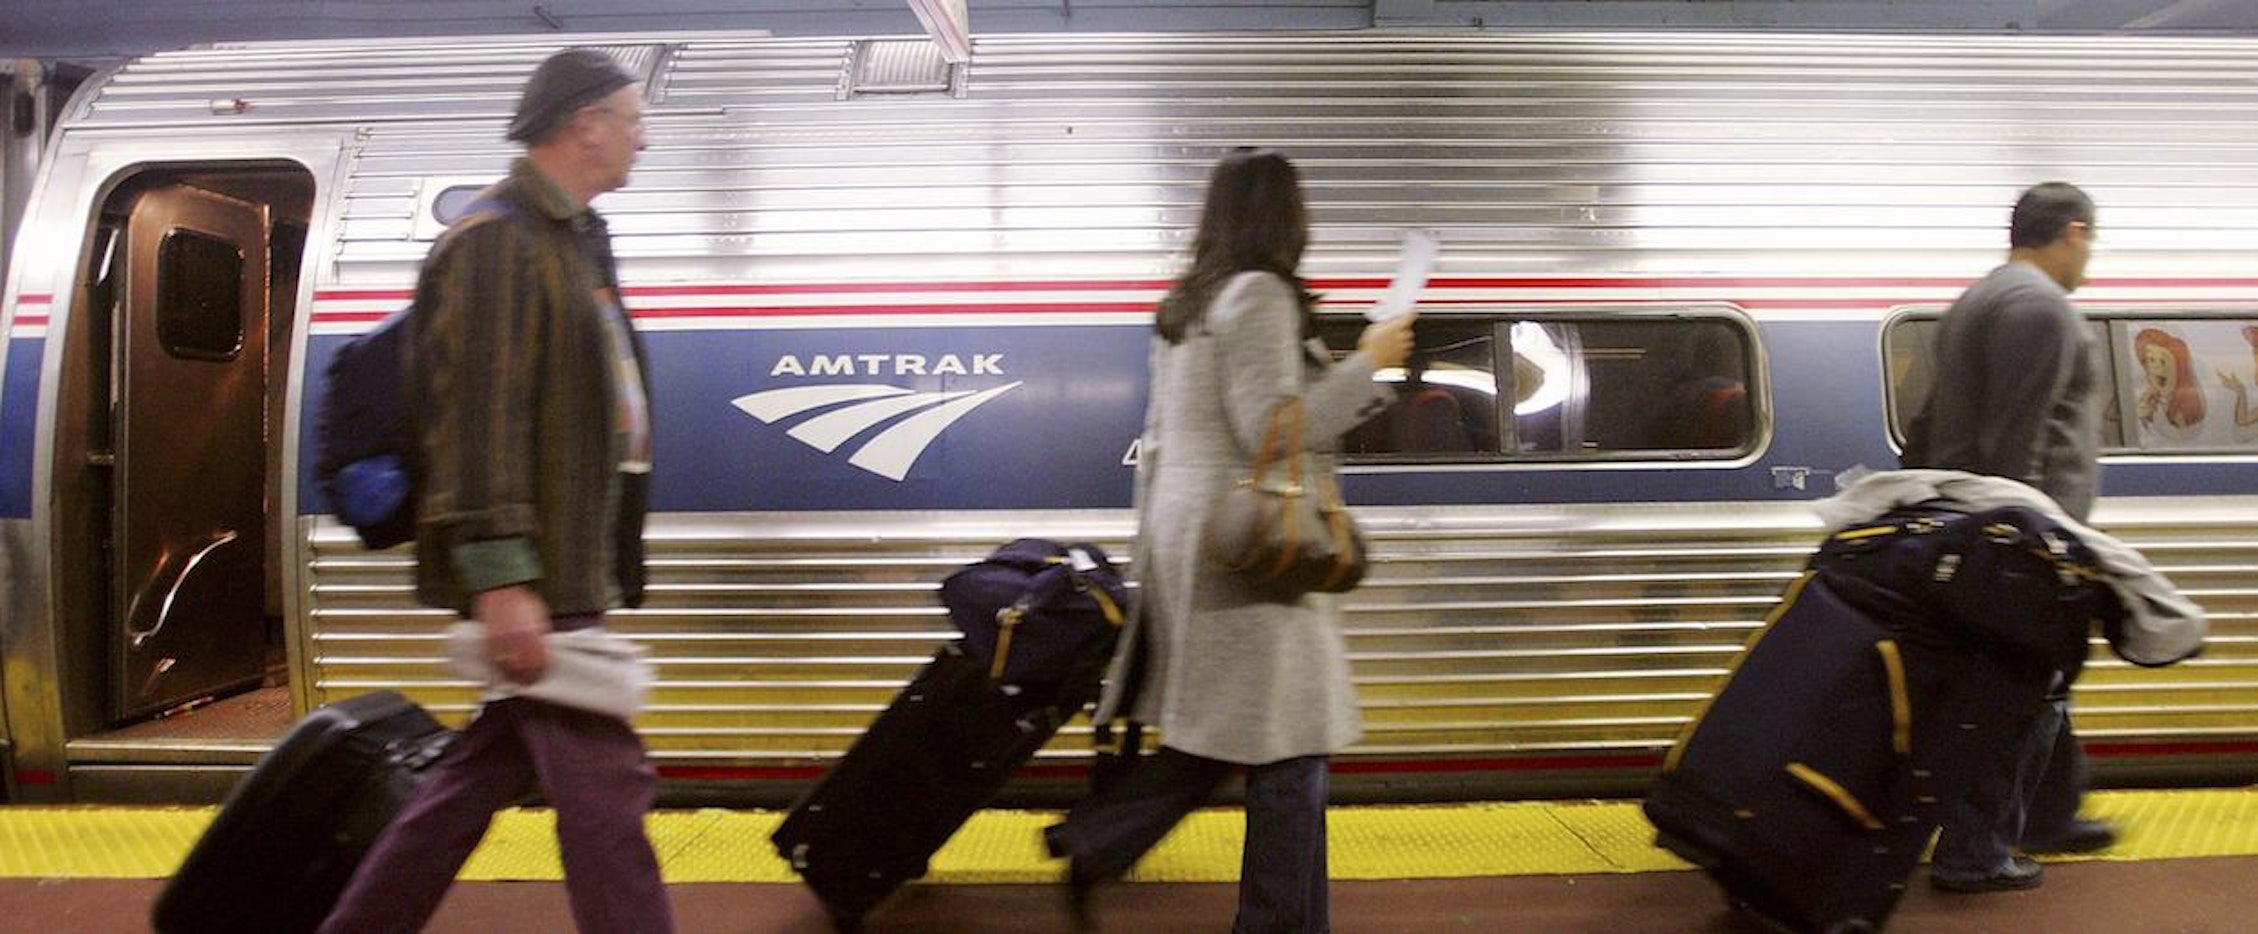 Amtrak Writers Residency Has Unique Appeal The New Republic